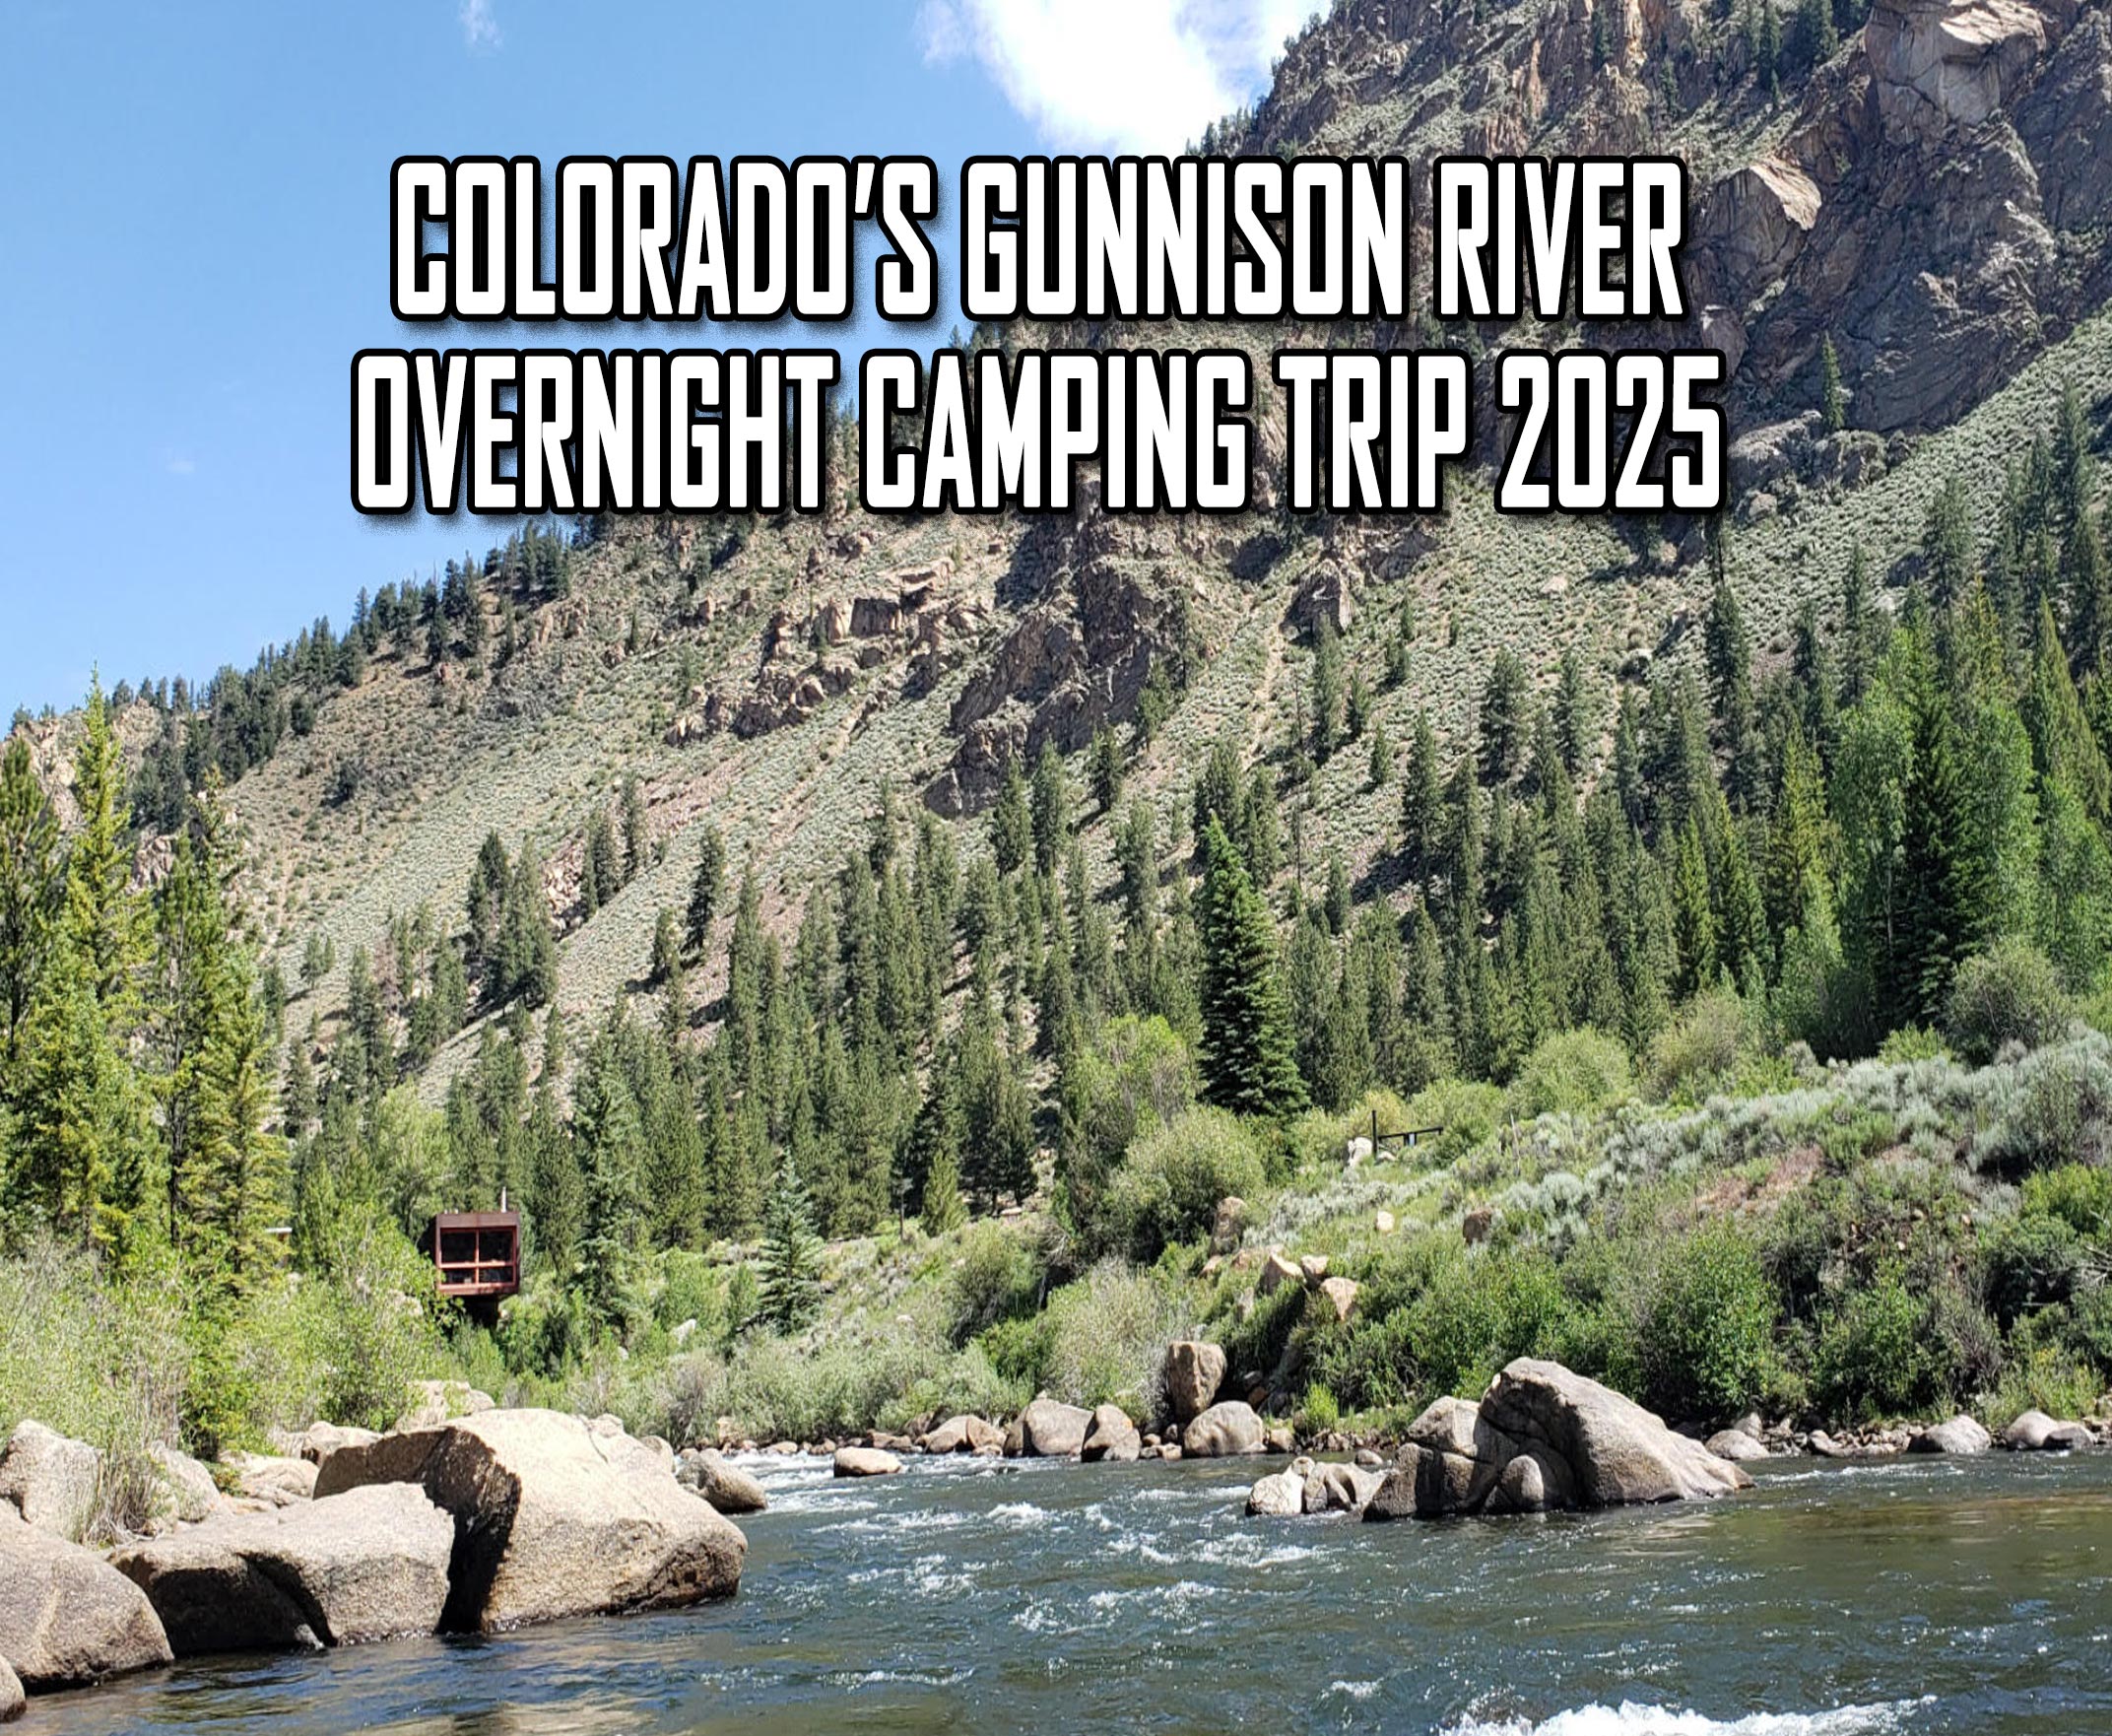 Another Unique Trip In Colorado. Spend Two Days Drift Boat Fishing The Gunnison And Arkansas Rivers. A Special Treat, Camping One Night On The Gunnison River. You Will Spend A Day Fishing One Of The Many Spring Creeks In The Area. 